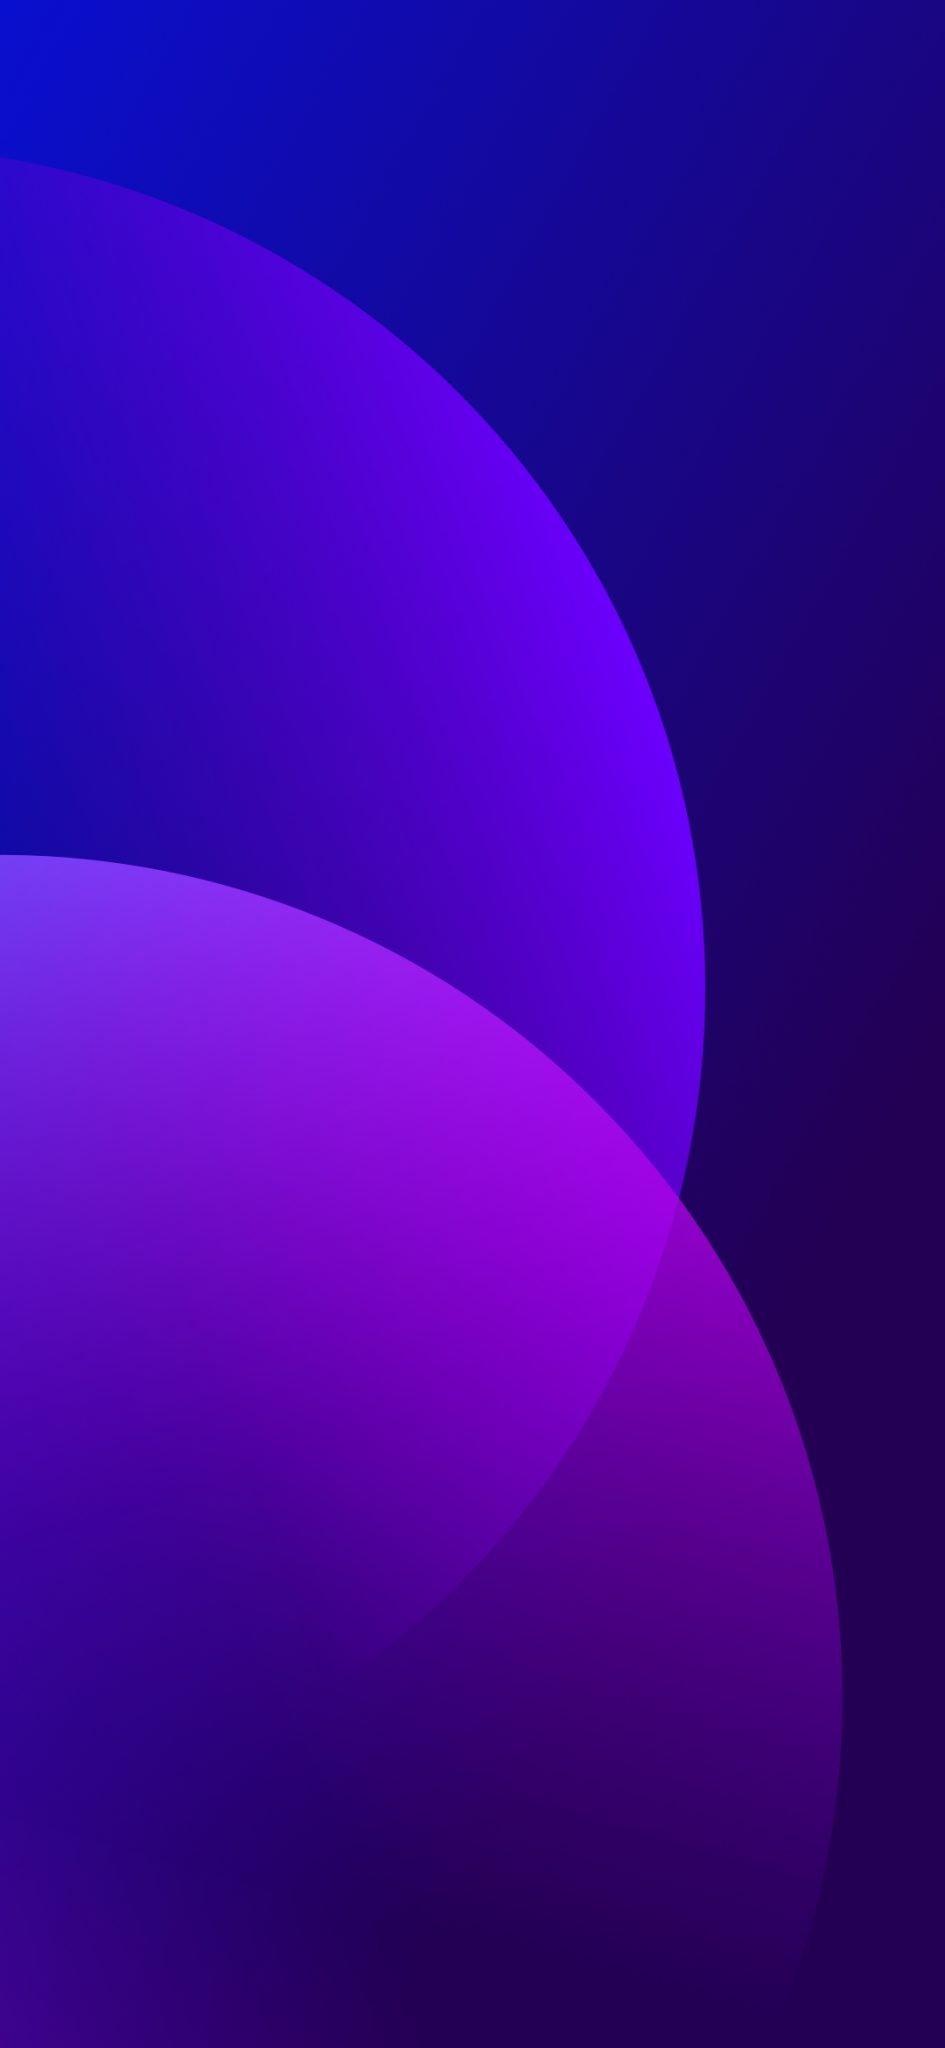 Oppo F11 Pro Wallpaper YTECHB Exclusive  Xiaomi wallpapers Abstract  iphone wallpaper Original iphone wallpaper